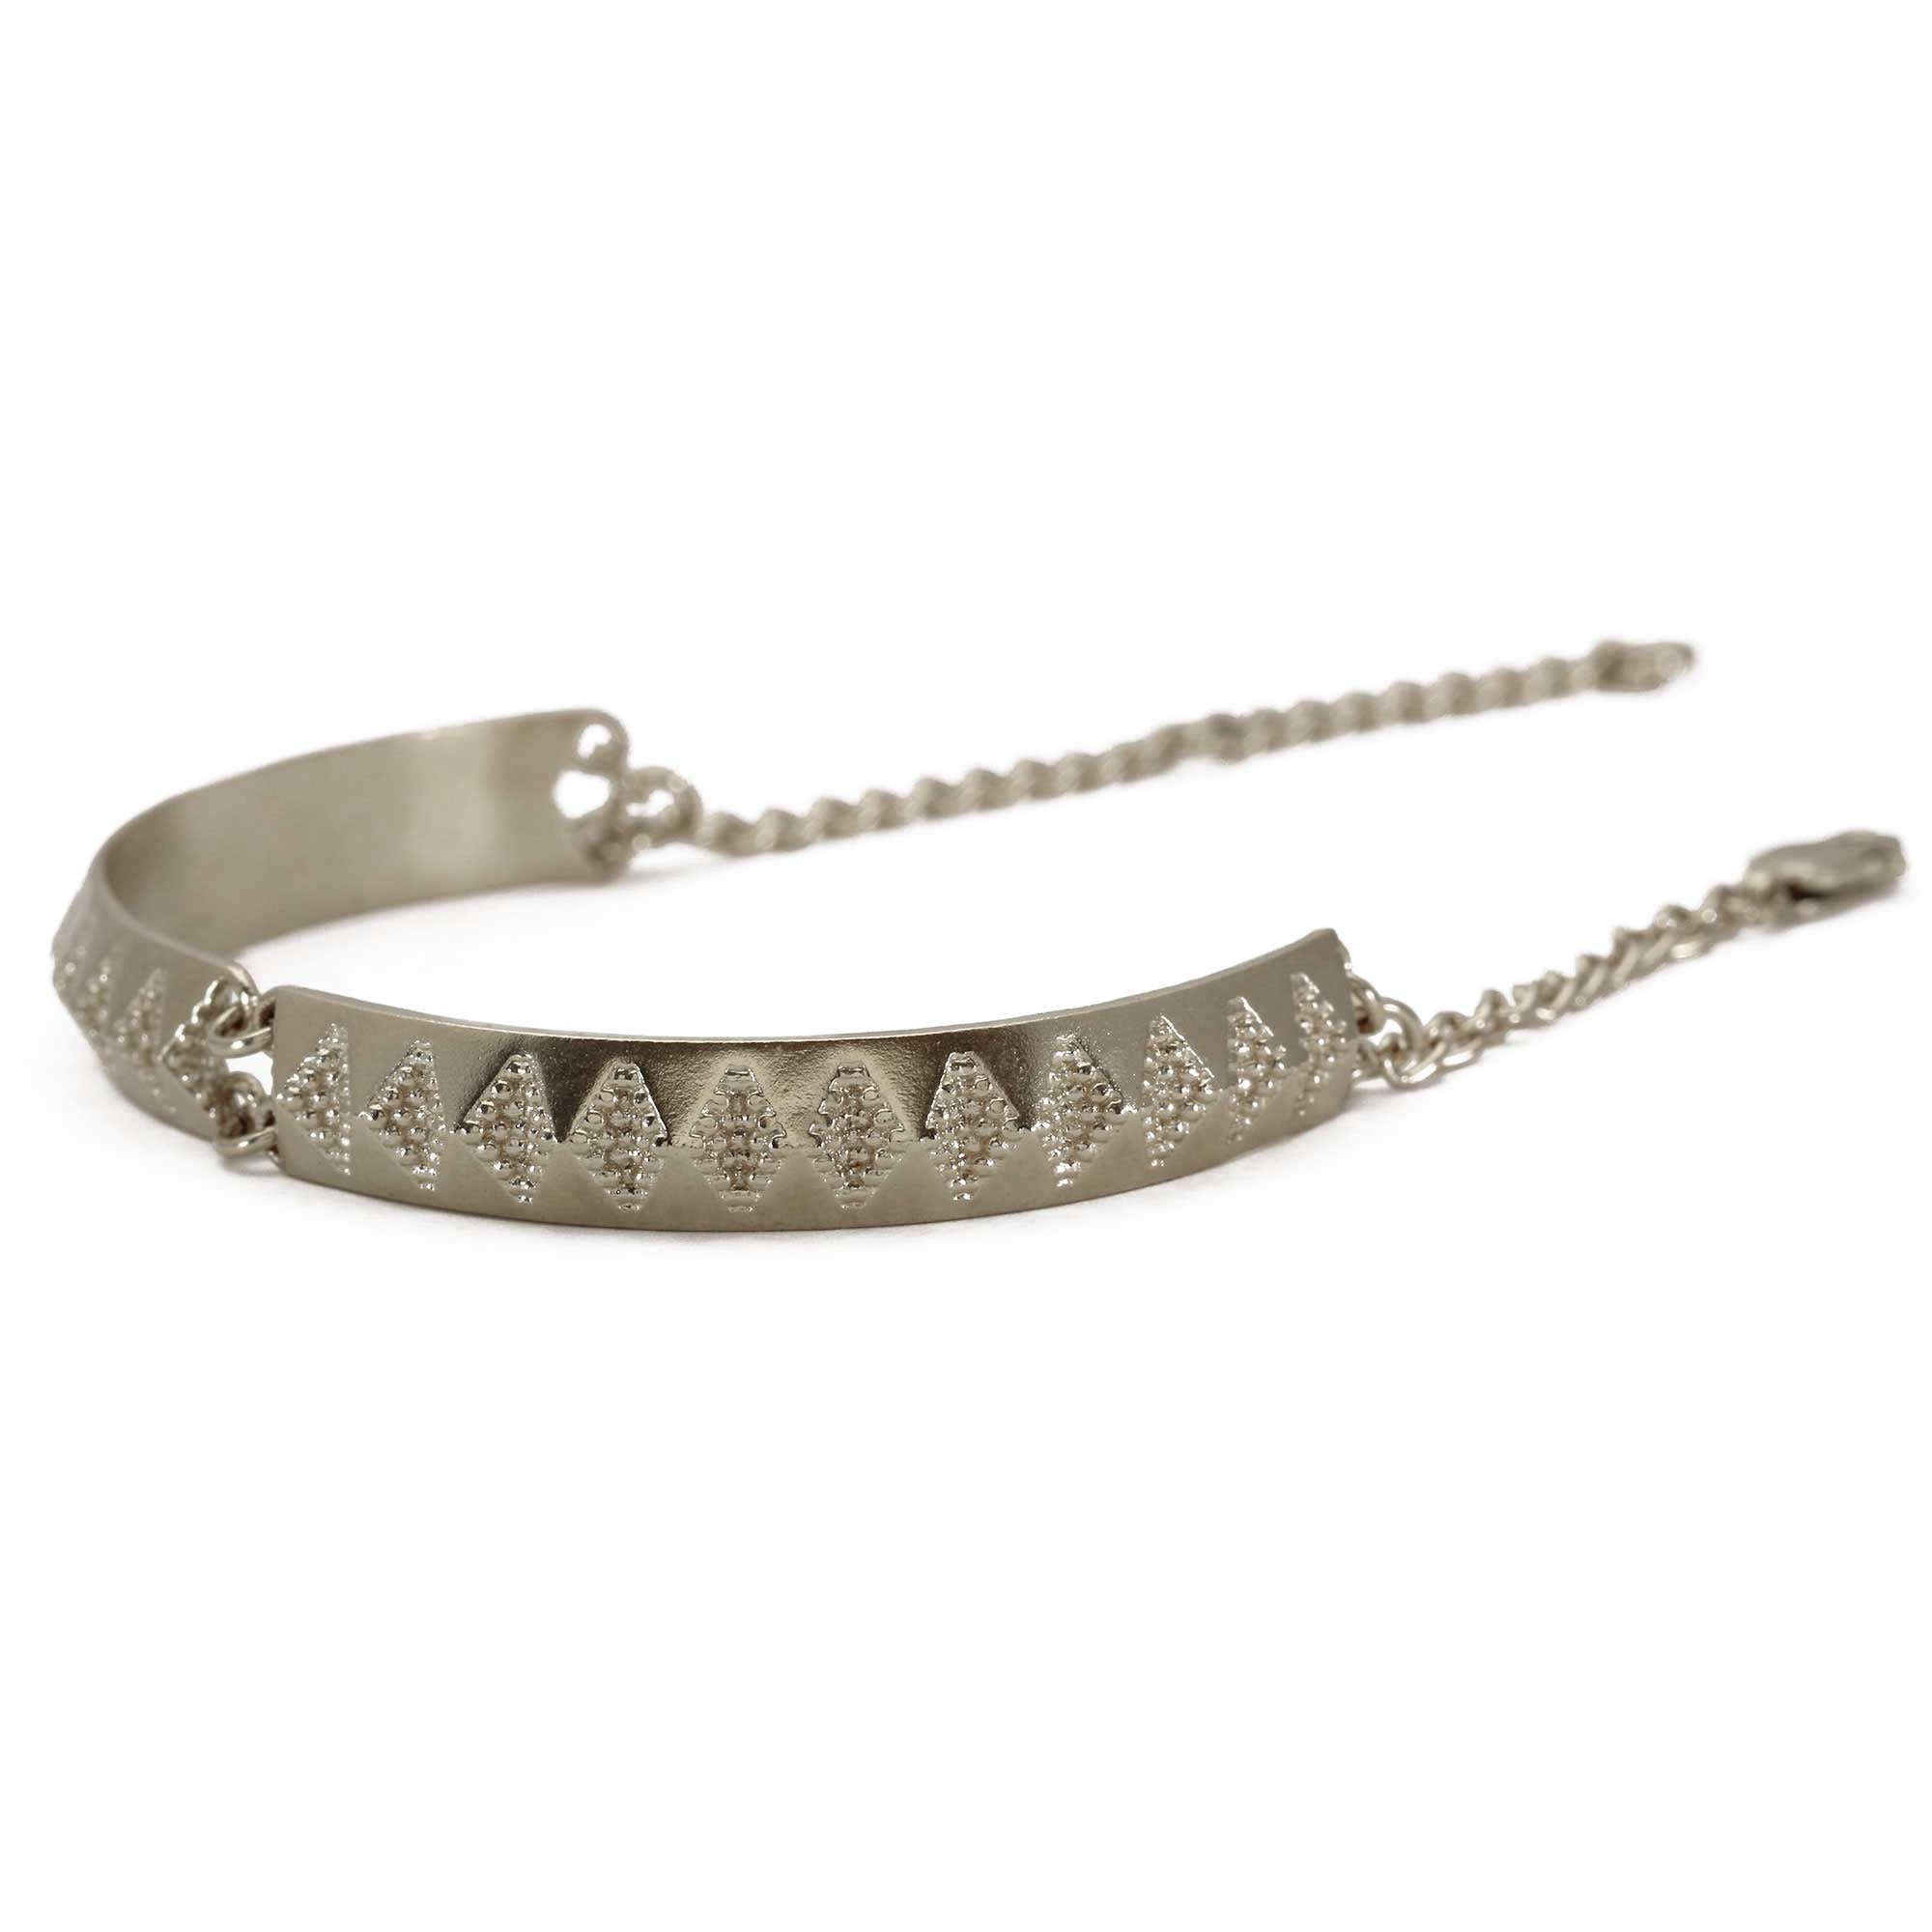 Silver bangle bracelet with repeating diamond imprint on white background 